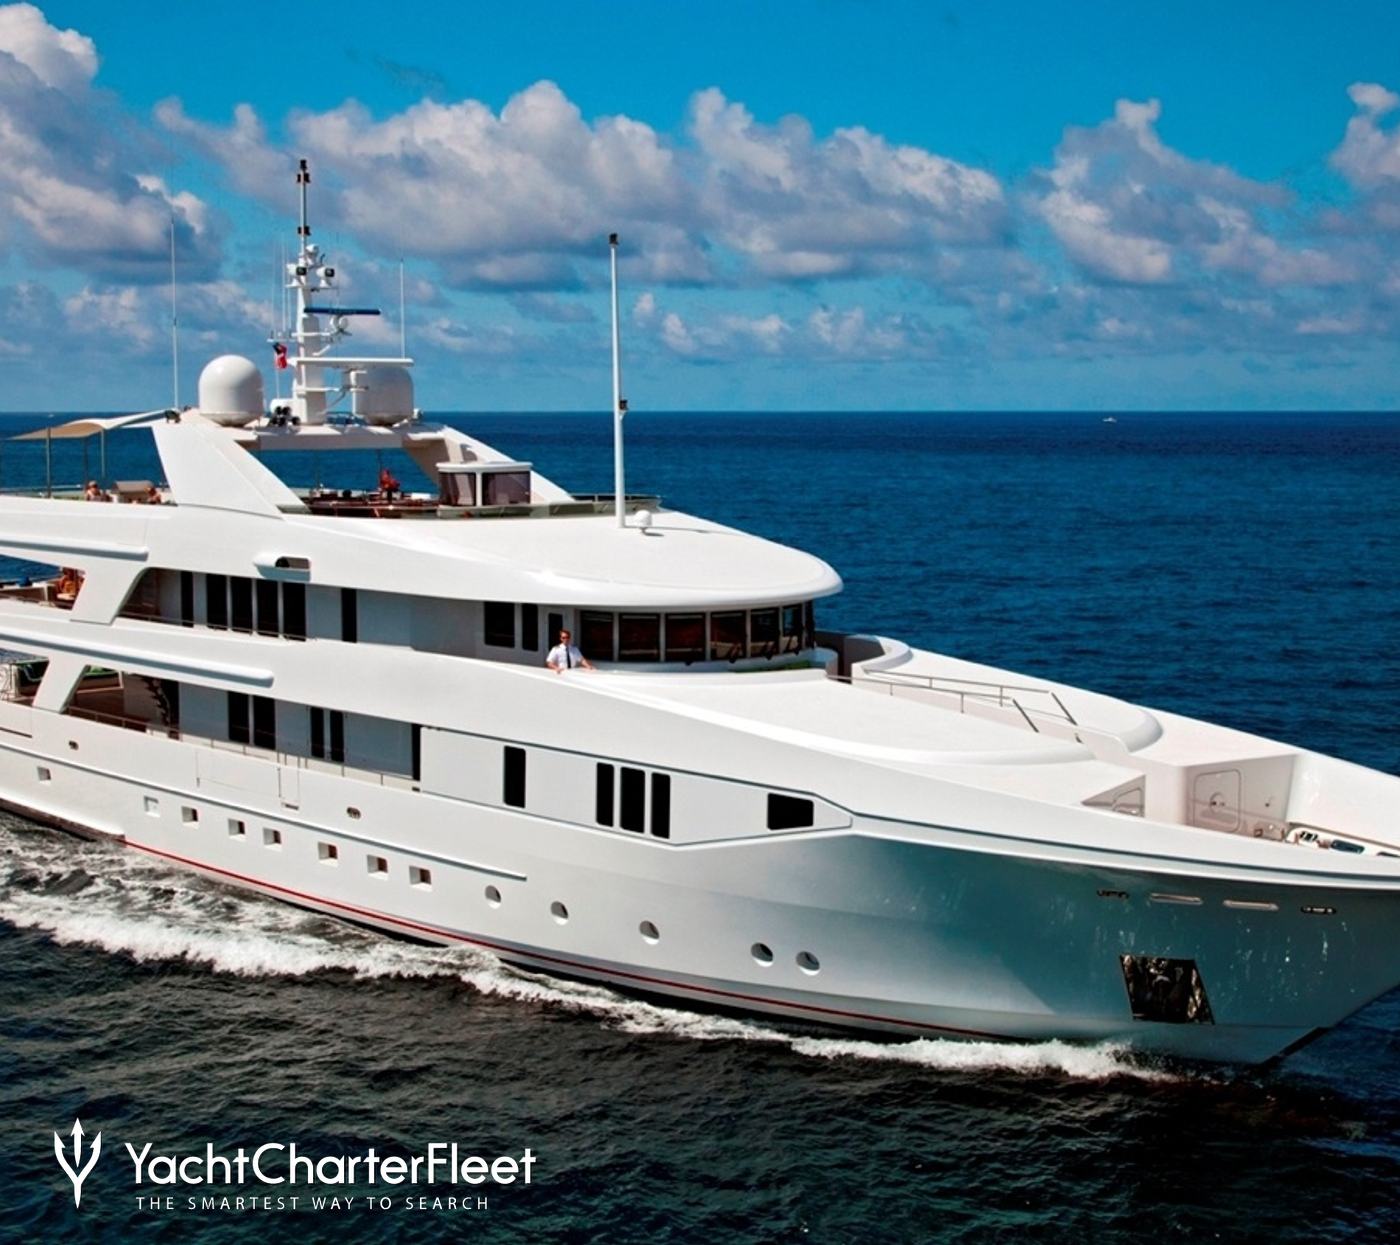 Below Deck Yachts: Real Names and Cost to Rent Revealed | Yacht Charter Fleet